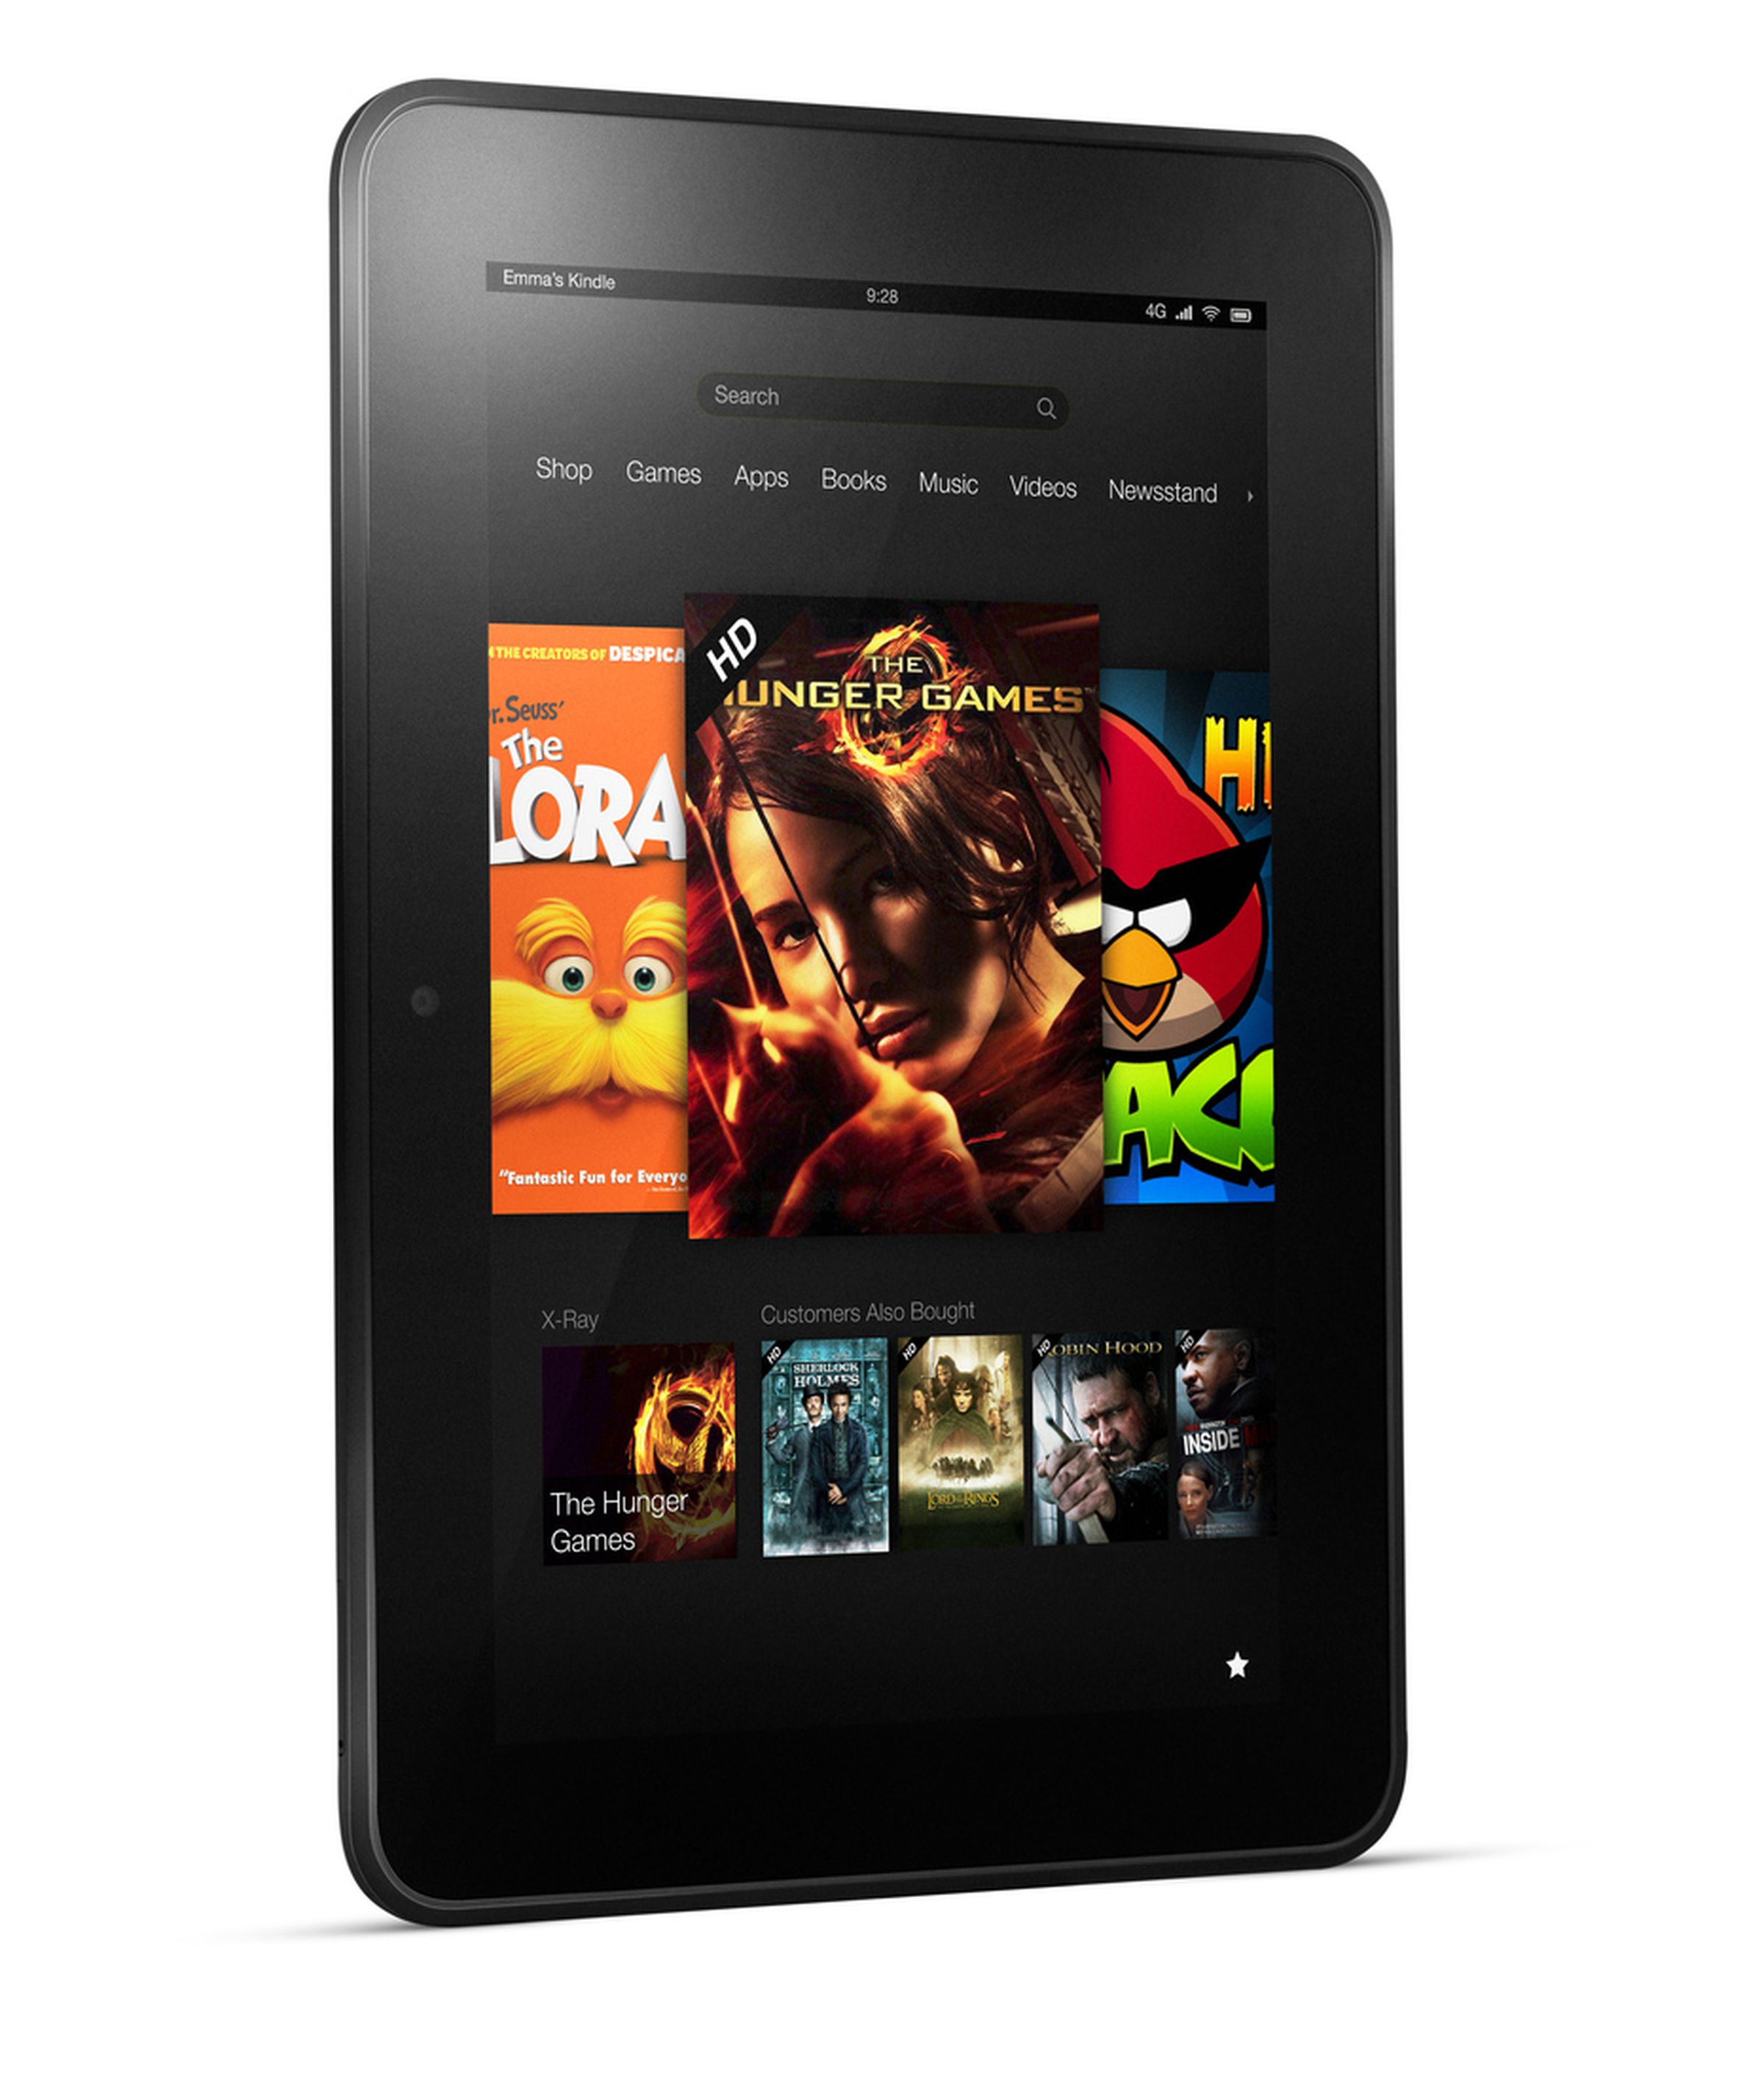 Amazon's new 8.9-inch Kindle Fire HD press images